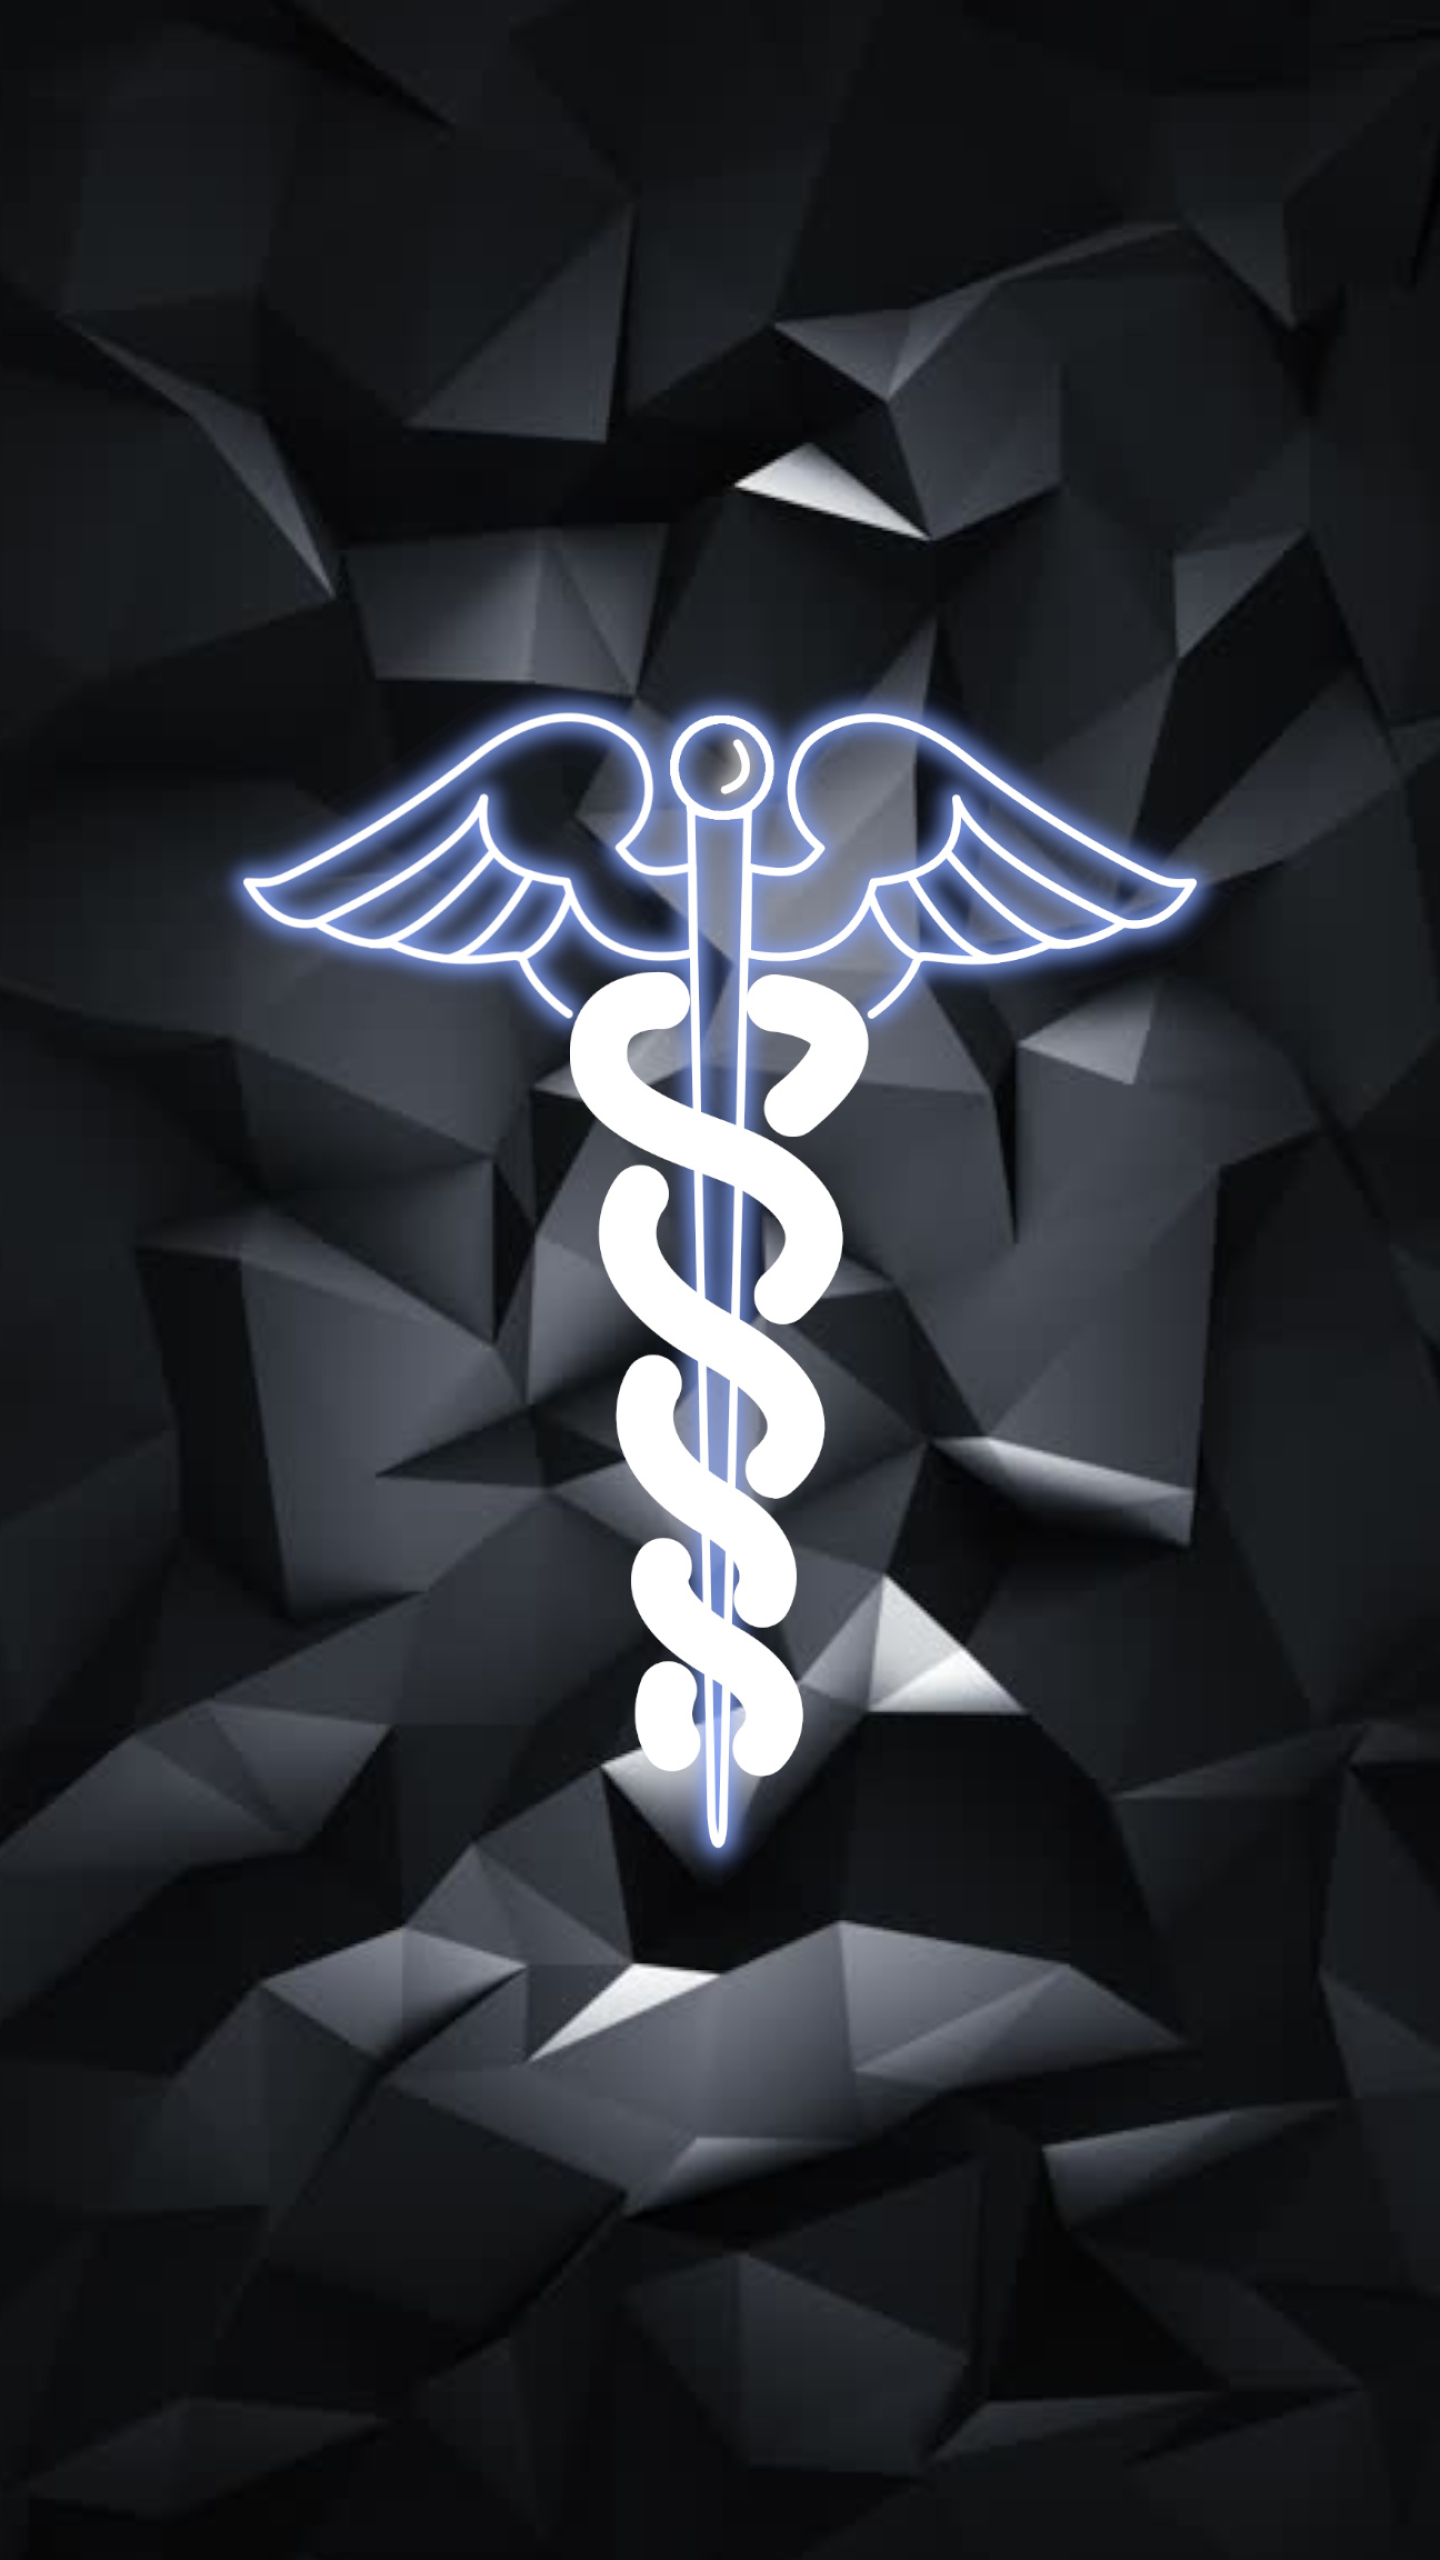 Android medical wallpaper, Health-related design, Medical-inspired visuals, Tech backgrounds, 1440x2560 HD Handy